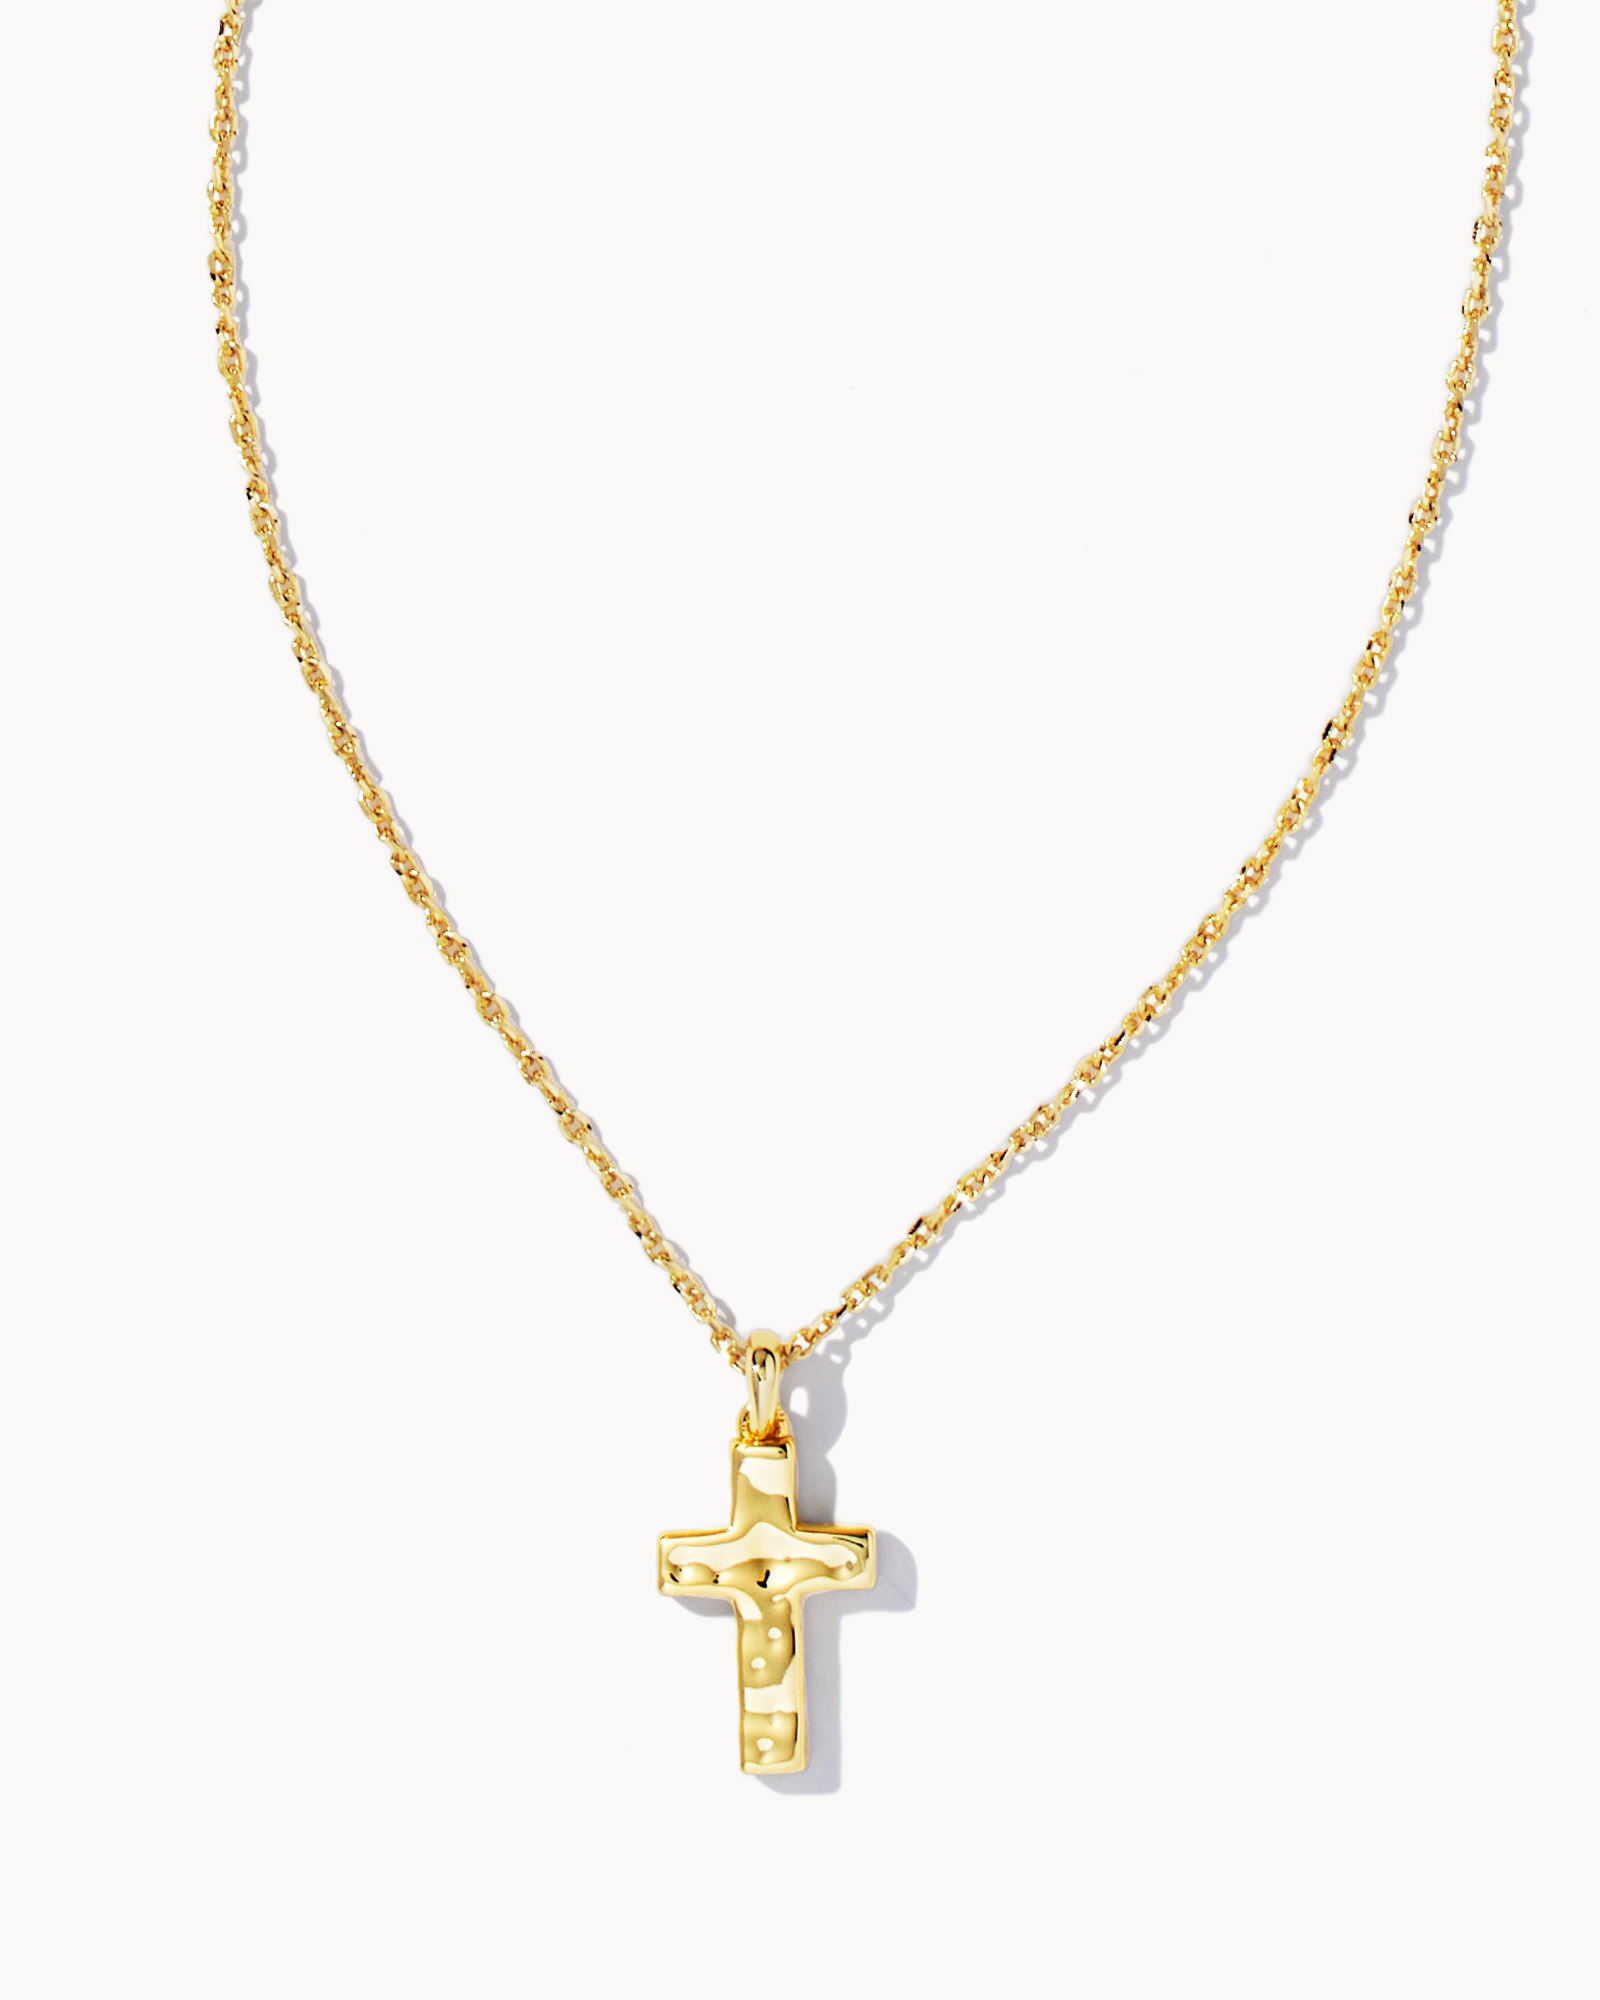 Small Gold Passion Cross Necklace - Gold Presidents